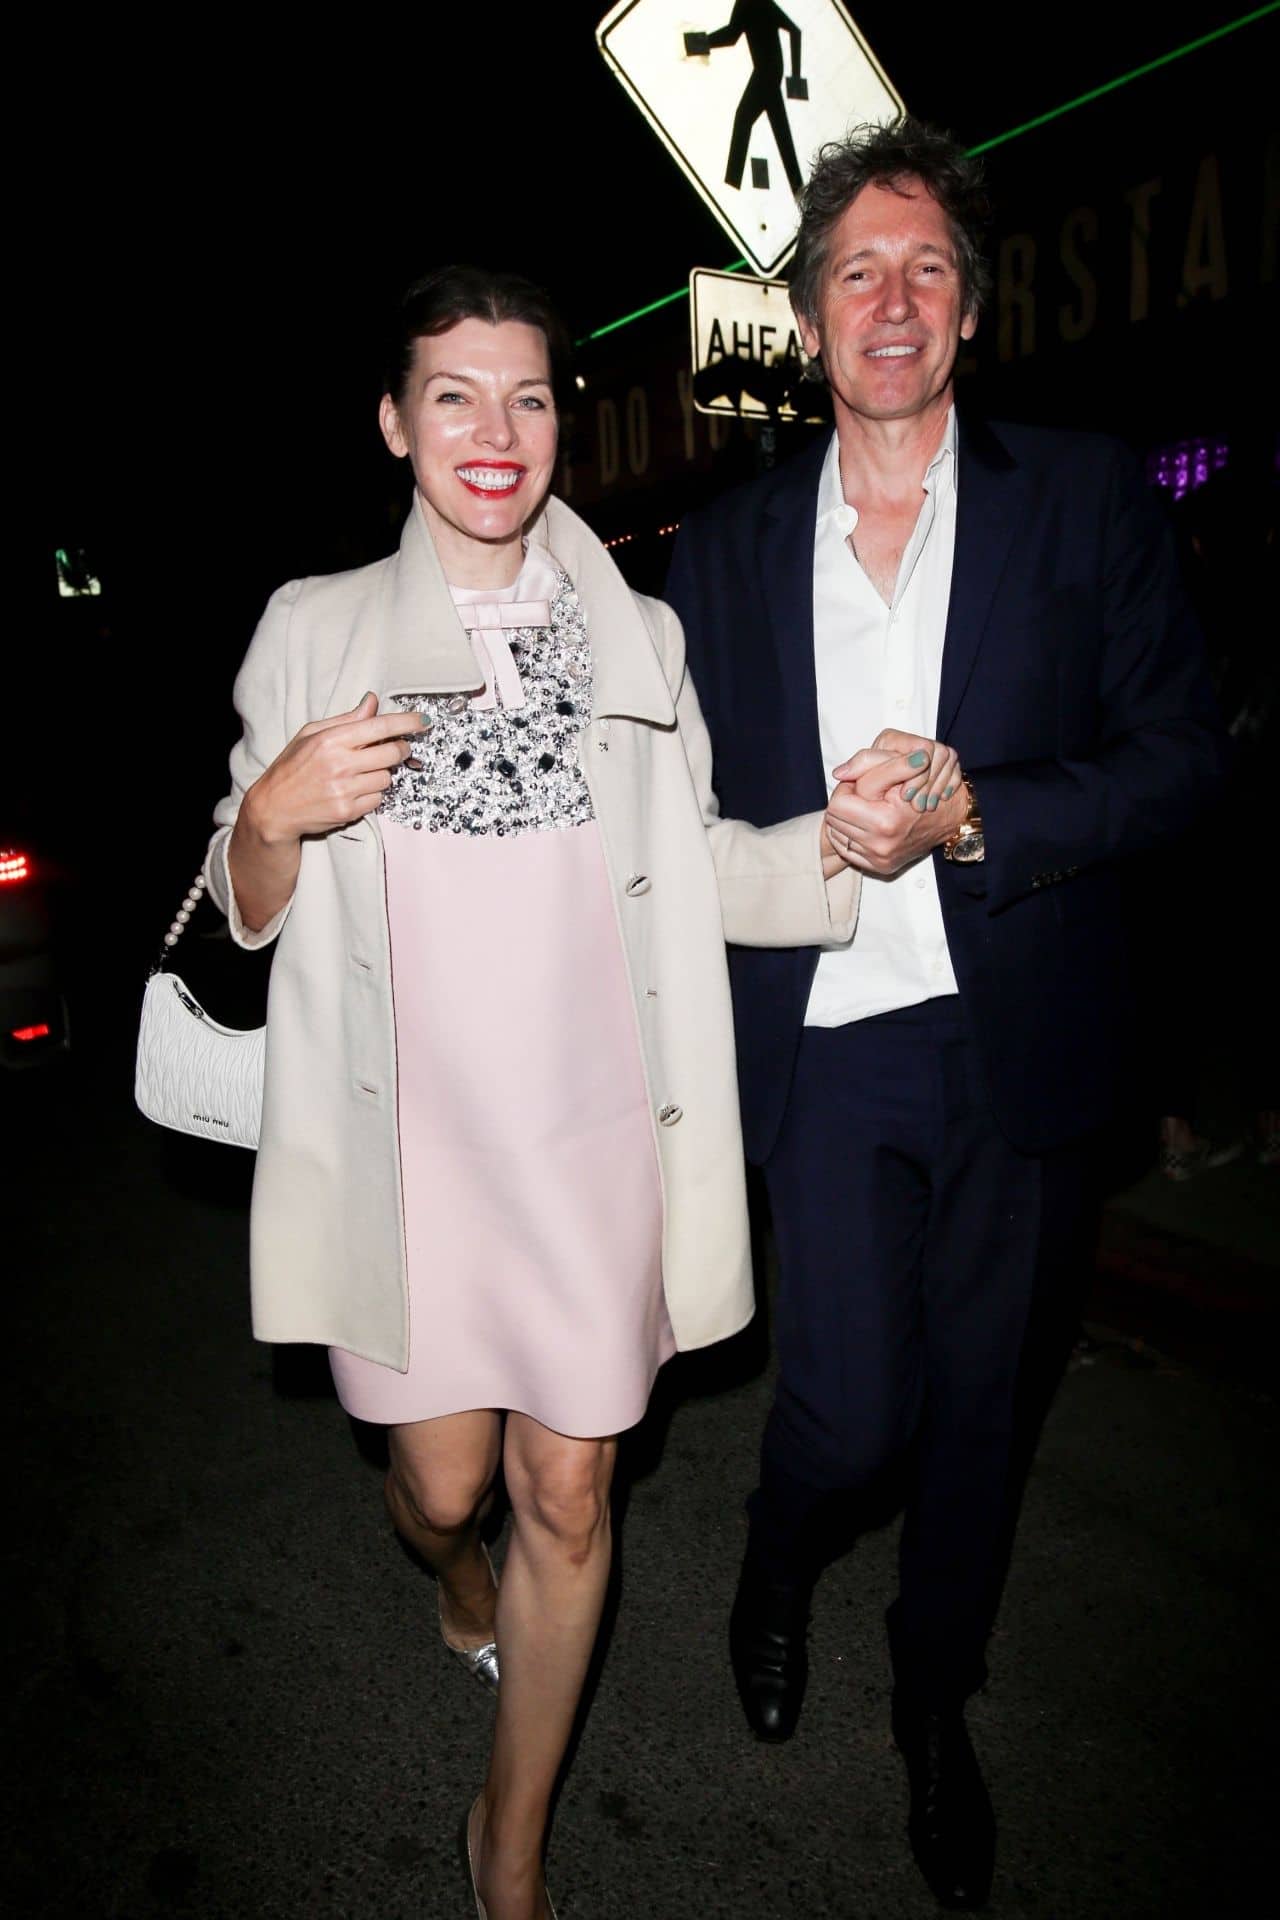 Milla Jovovich Stuns with her Glowing Smile and Pink Dress at Prada Event